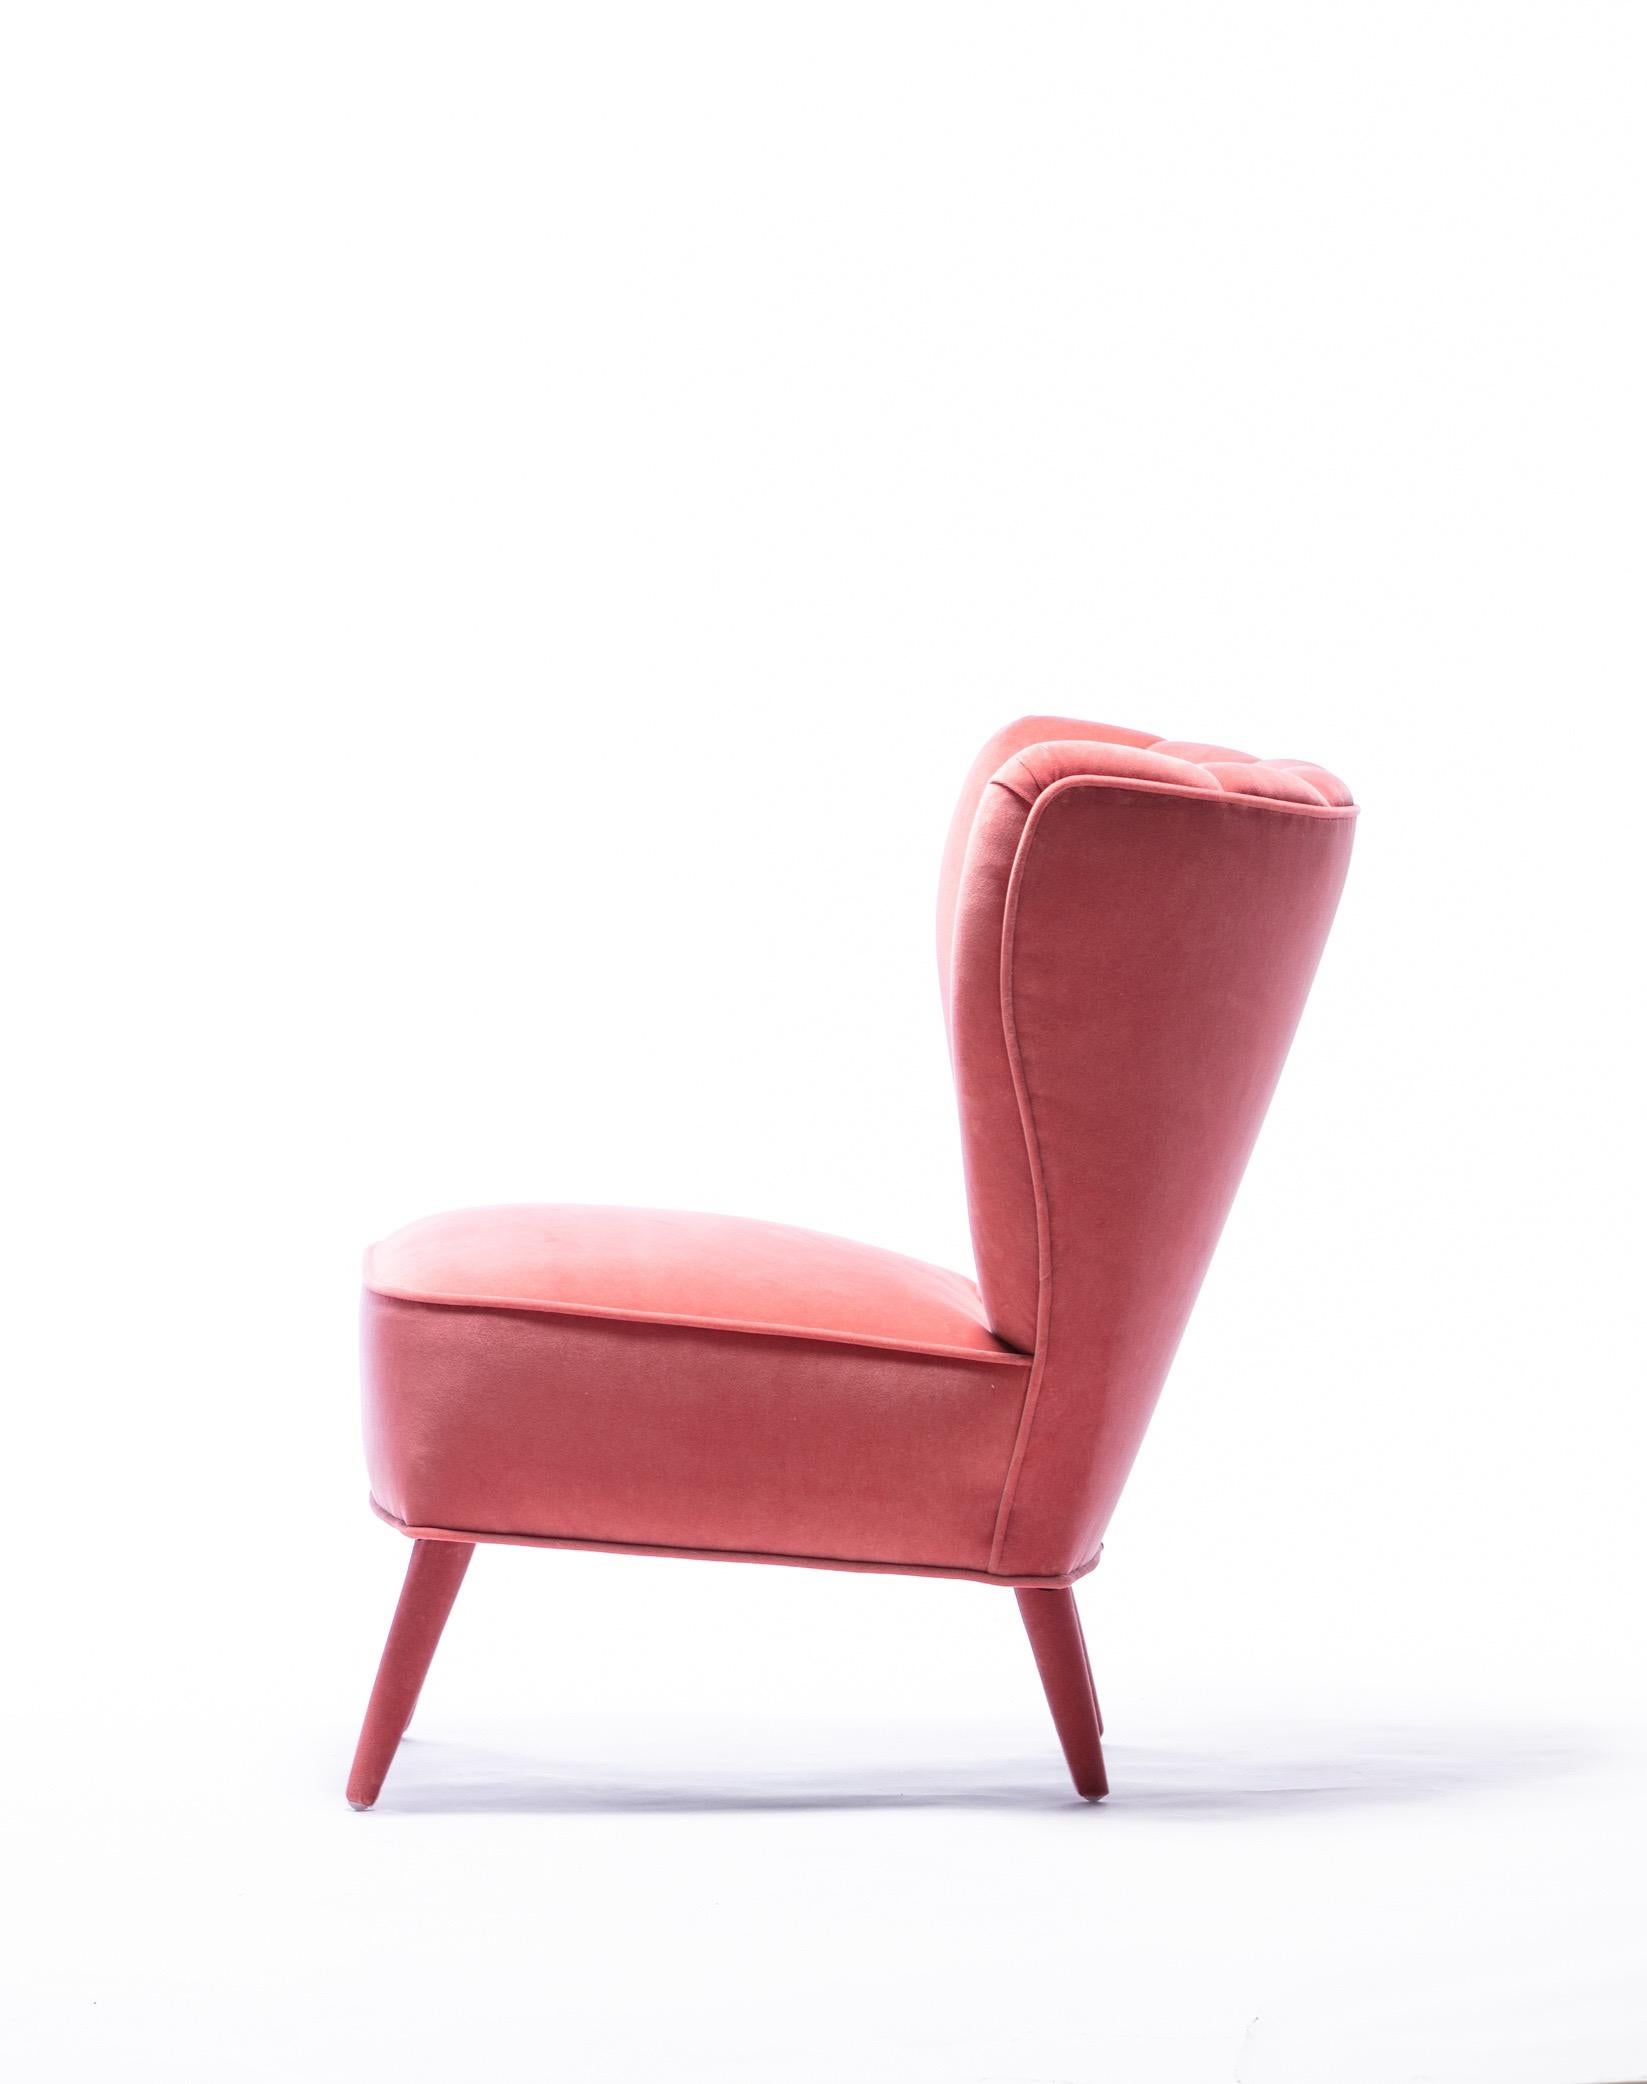 Elegant and chic vintage Italian rose pink colored velvet slipper chair. We admit to drawing some inspiration from the slipper chairs in Gucci stores when we selected the upholstery and details on recovering this vintage Italian slipper chair. The